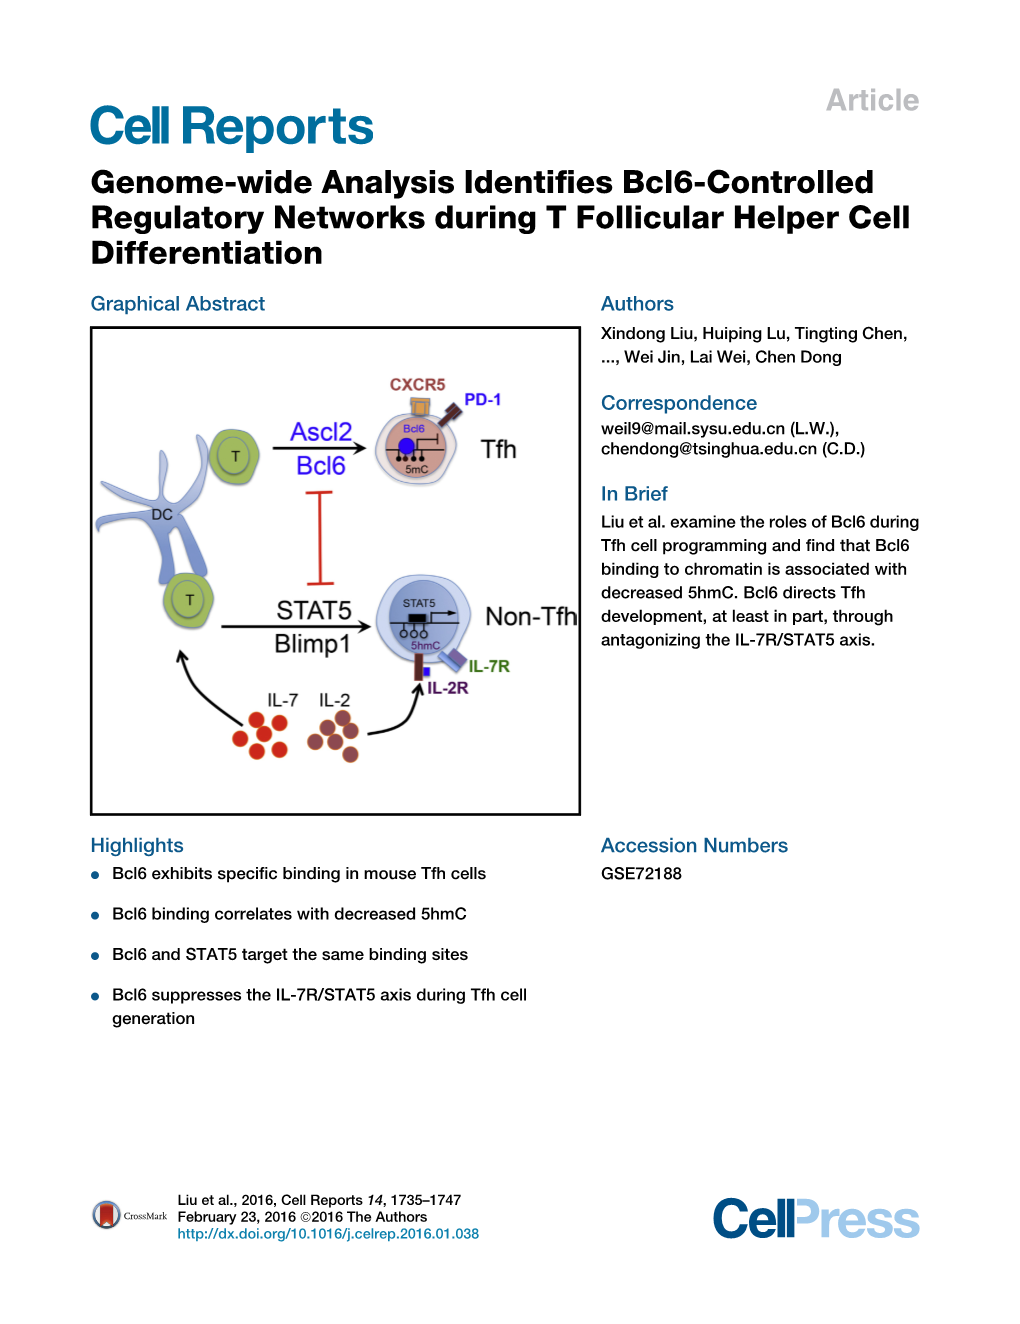 Genome-Wide Analysis Identifies Bcl6-Controlled Regulatory